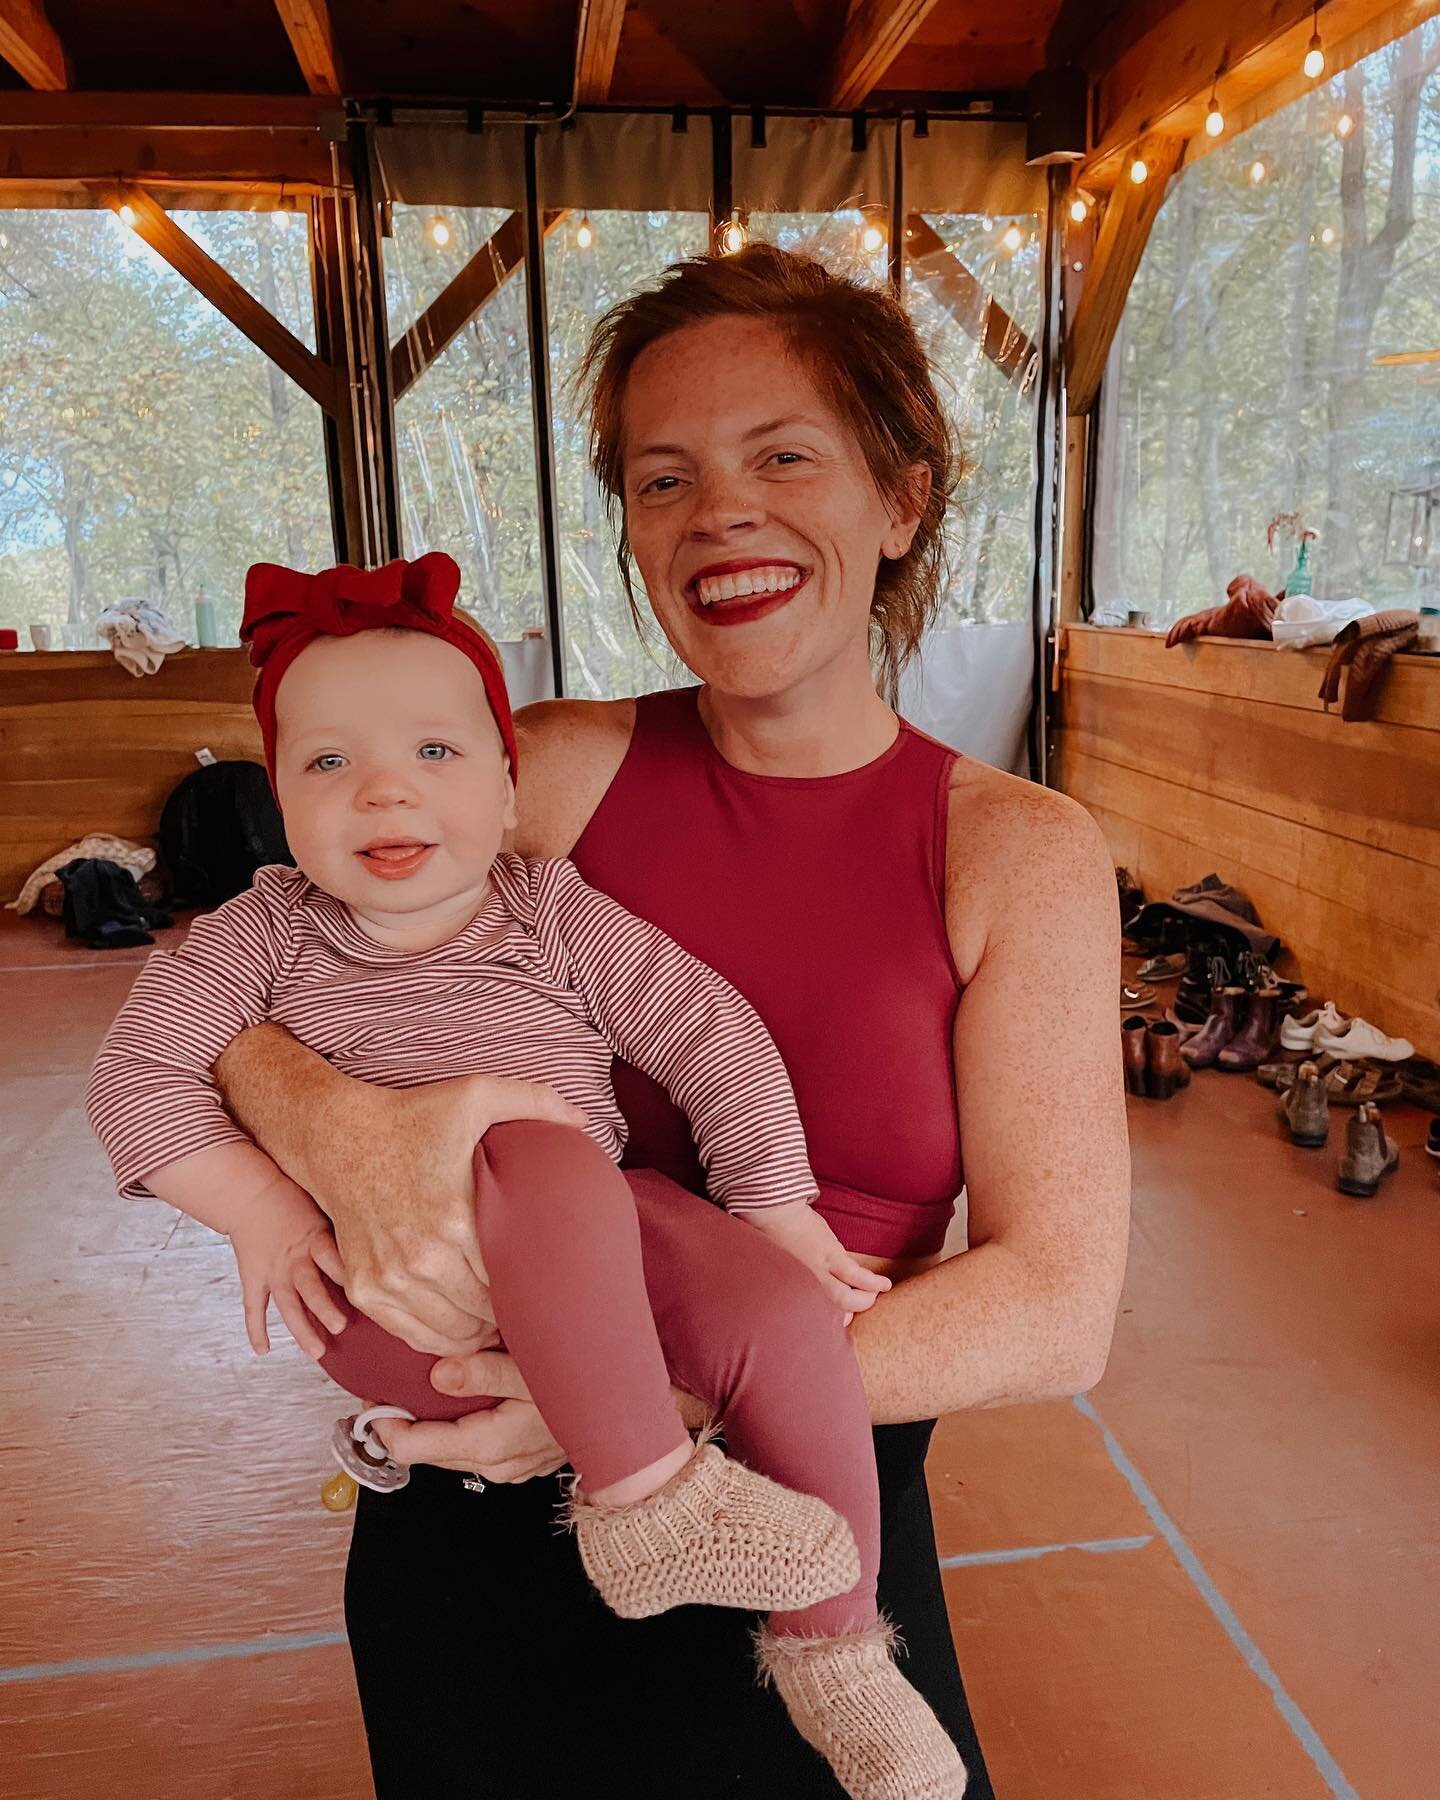 October in Asheville with my girl ❣️🤎 grateful to be held by so many loving women at @theheartspace.community gathering, even when we&rsquo;re tired &amp; teething 🫠